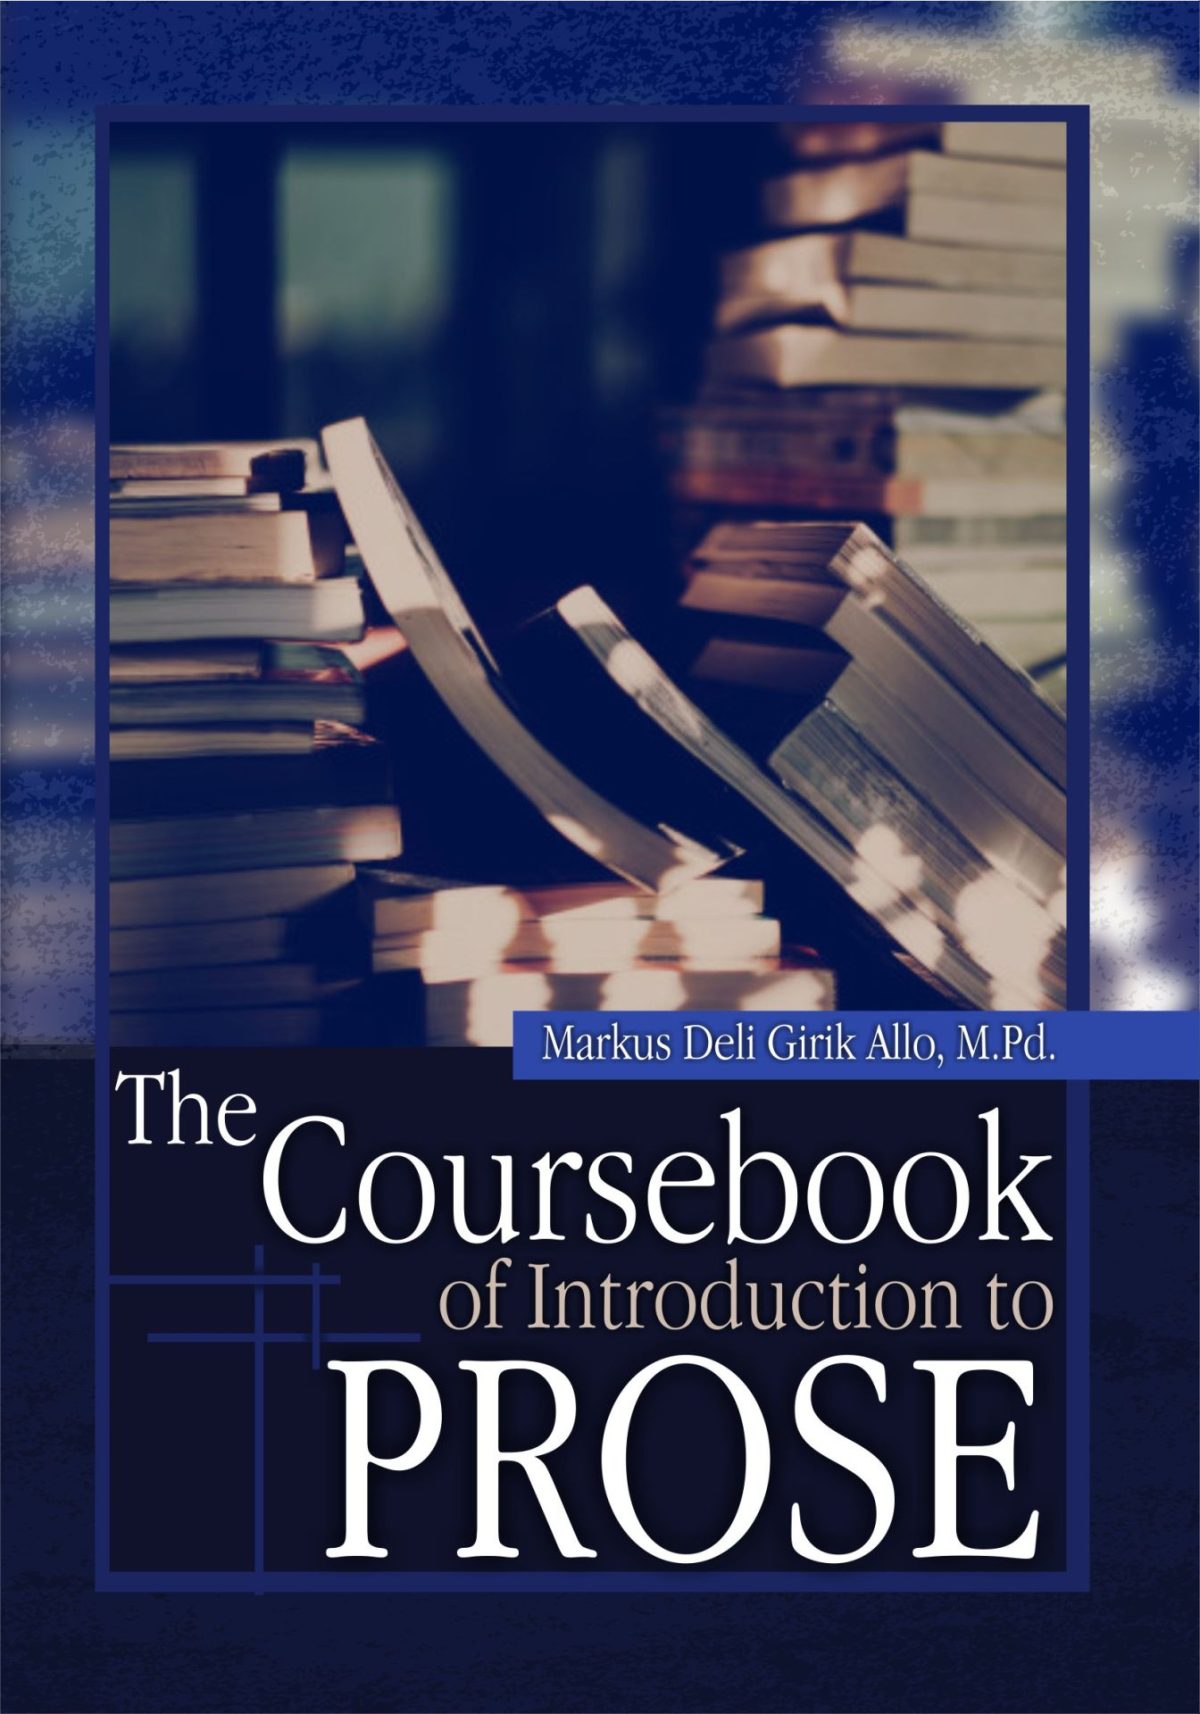 The Coursebook of Introduction to Prose